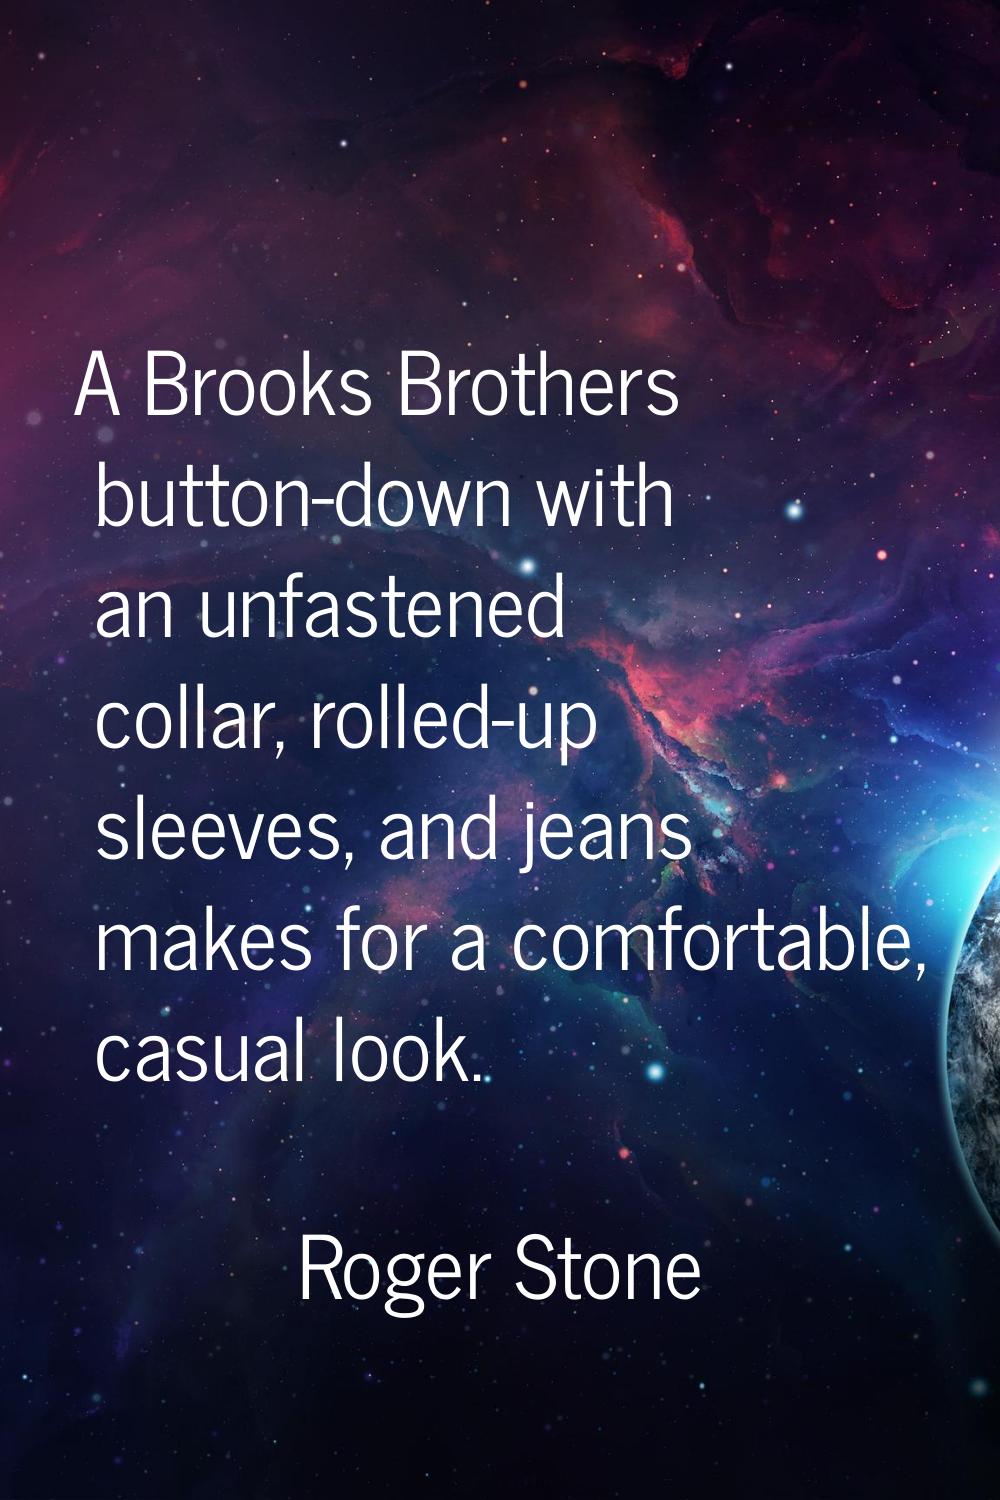 A Brooks Brothers button-down with an unfastened collar, rolled-up sleeves, and jeans makes for a c